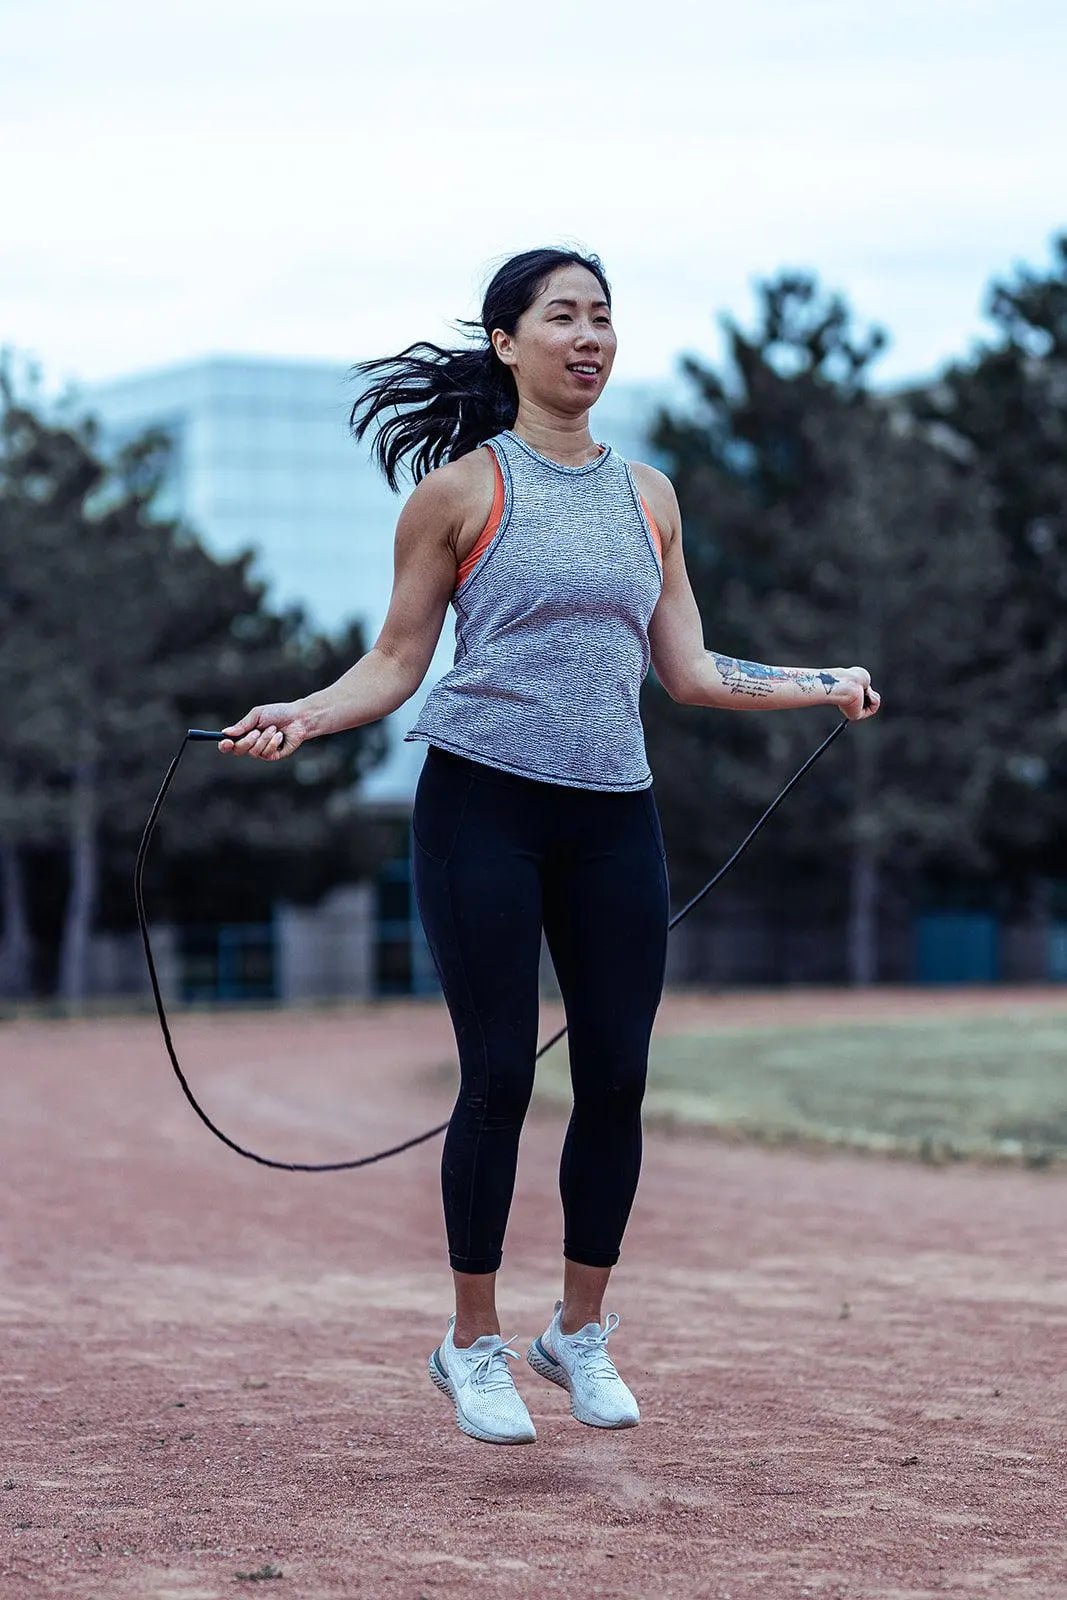 https://cdn.shopify.com/s/files/1/1142/3440/articles/how-jump-rope-compares-to-other-cardio-exercise-460920.jpg?v=1698148905